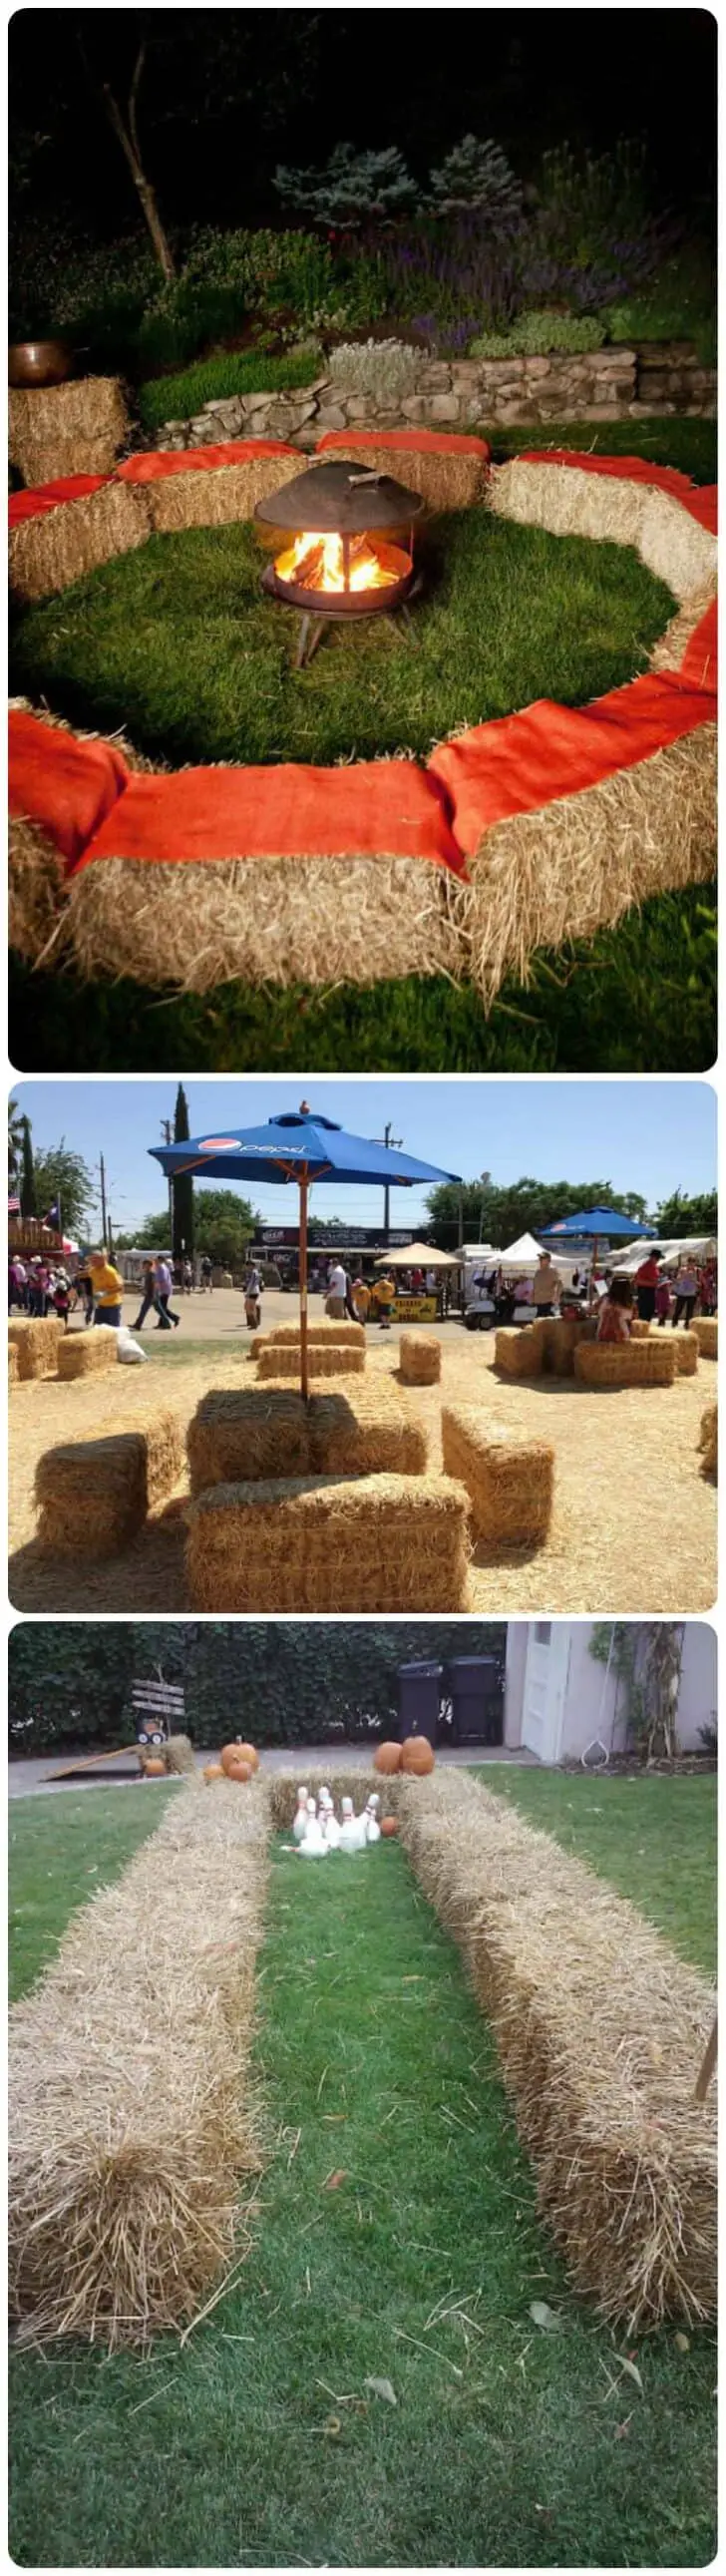 18 Ways to Use Straw Bales for a Shabby Chic Wedding/Garden Party 38 - Garden Decor